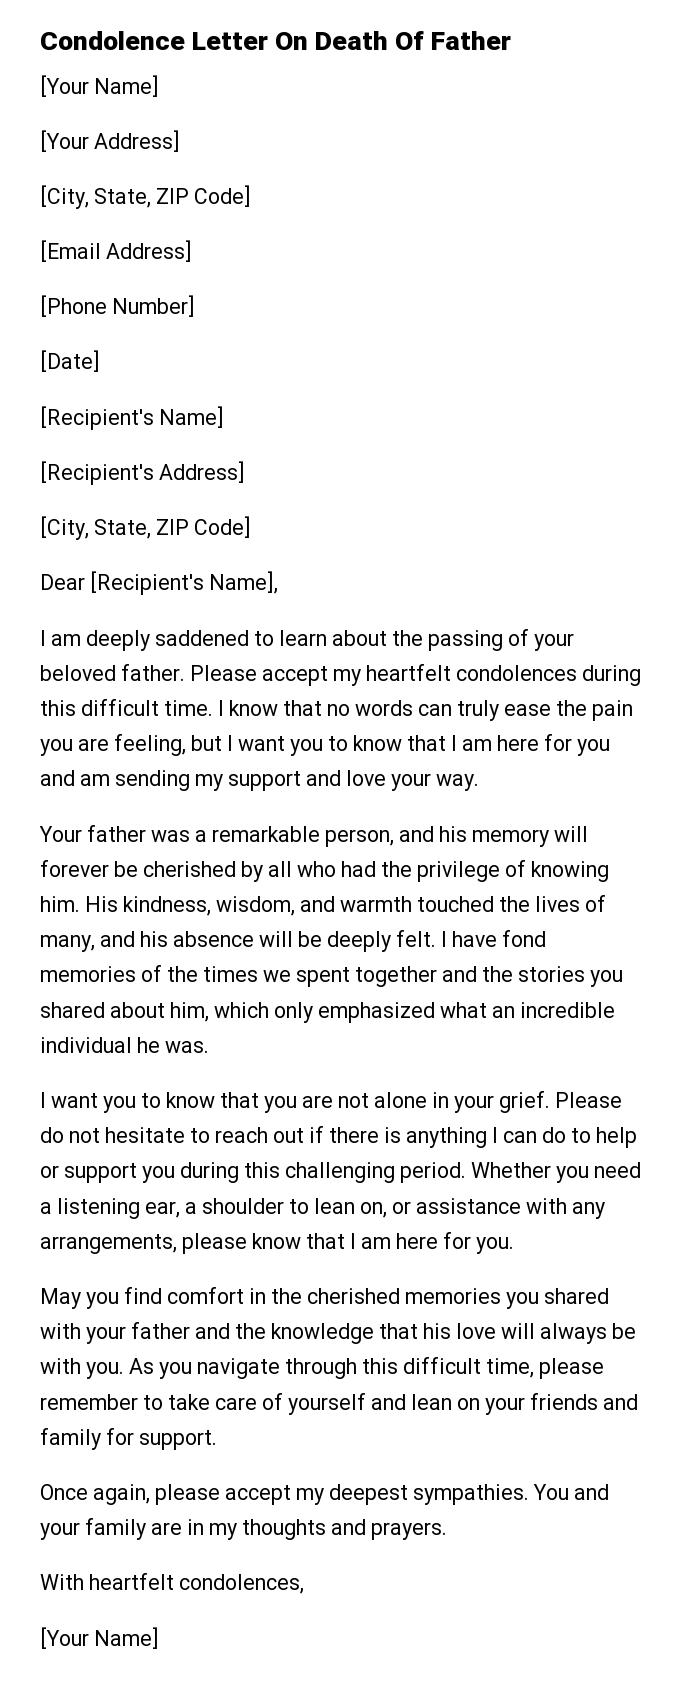 Condolence Letter On Death Of Father